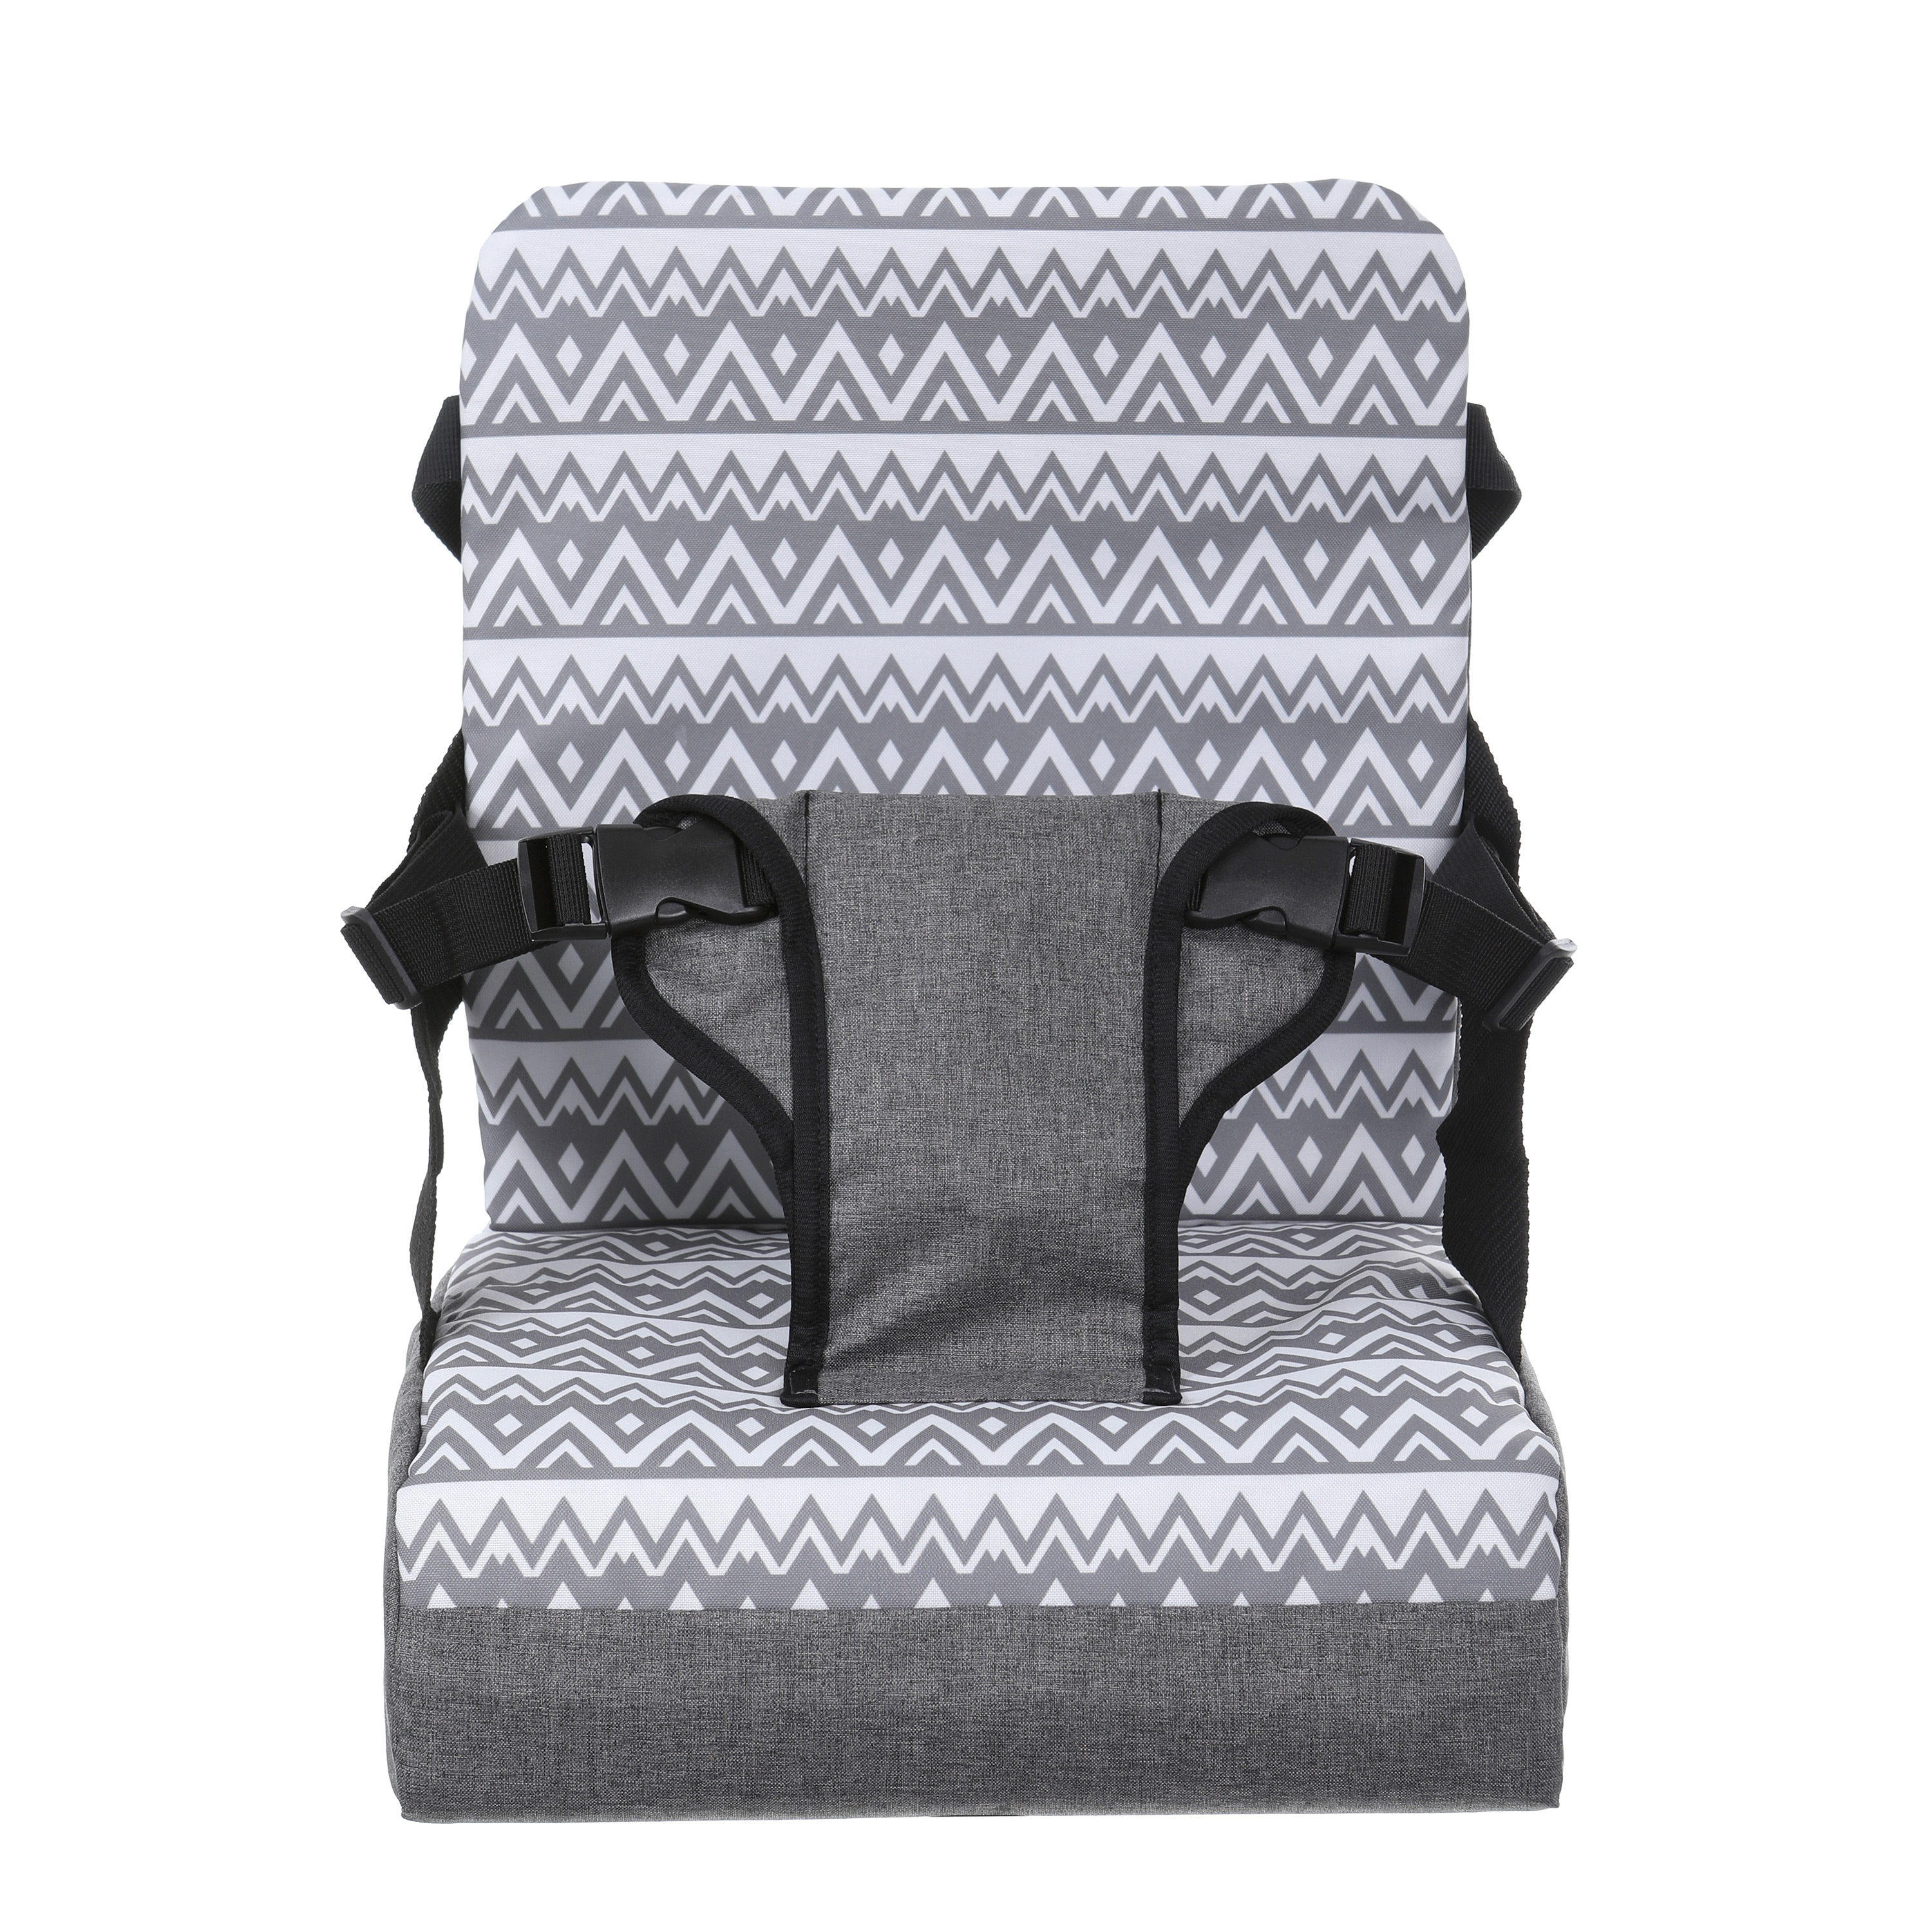 Buy Dreambaby Feeding & On-the-Go Booster Seat with Storage, Booster seats